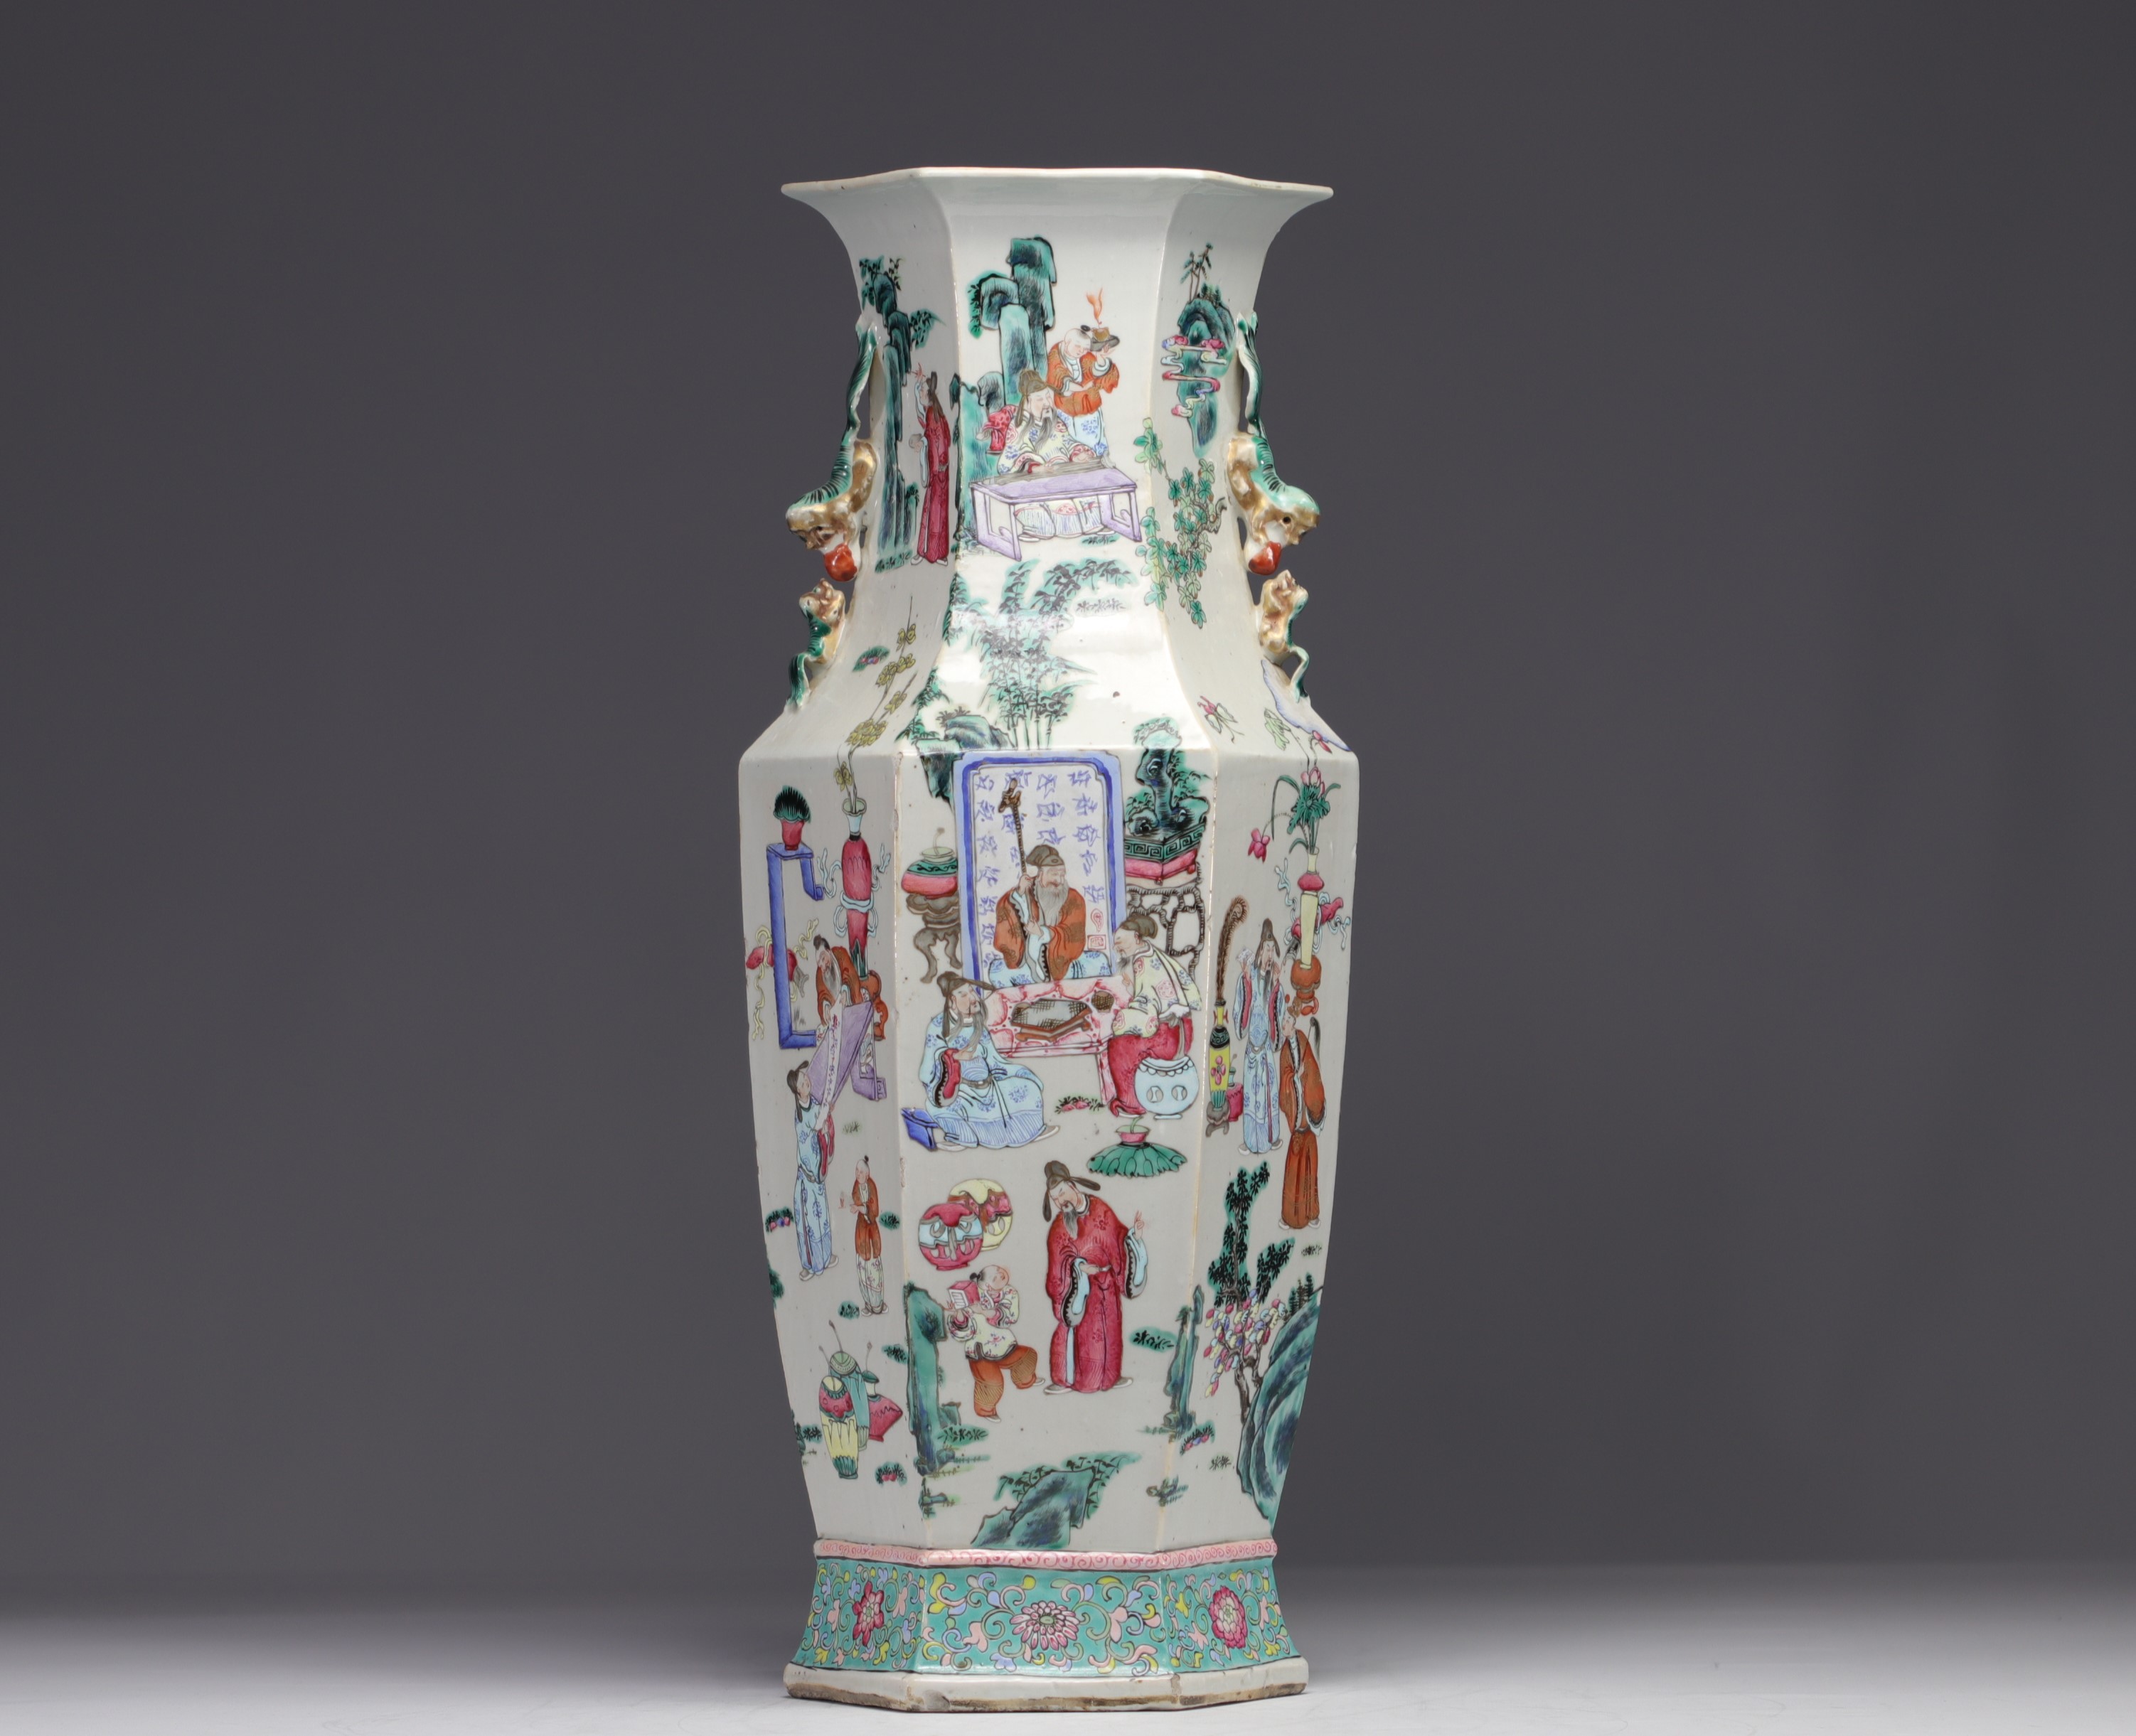 China - imposing famille rose porcelain vase decorated with scenes of life, 19th century. - Image 4 of 6